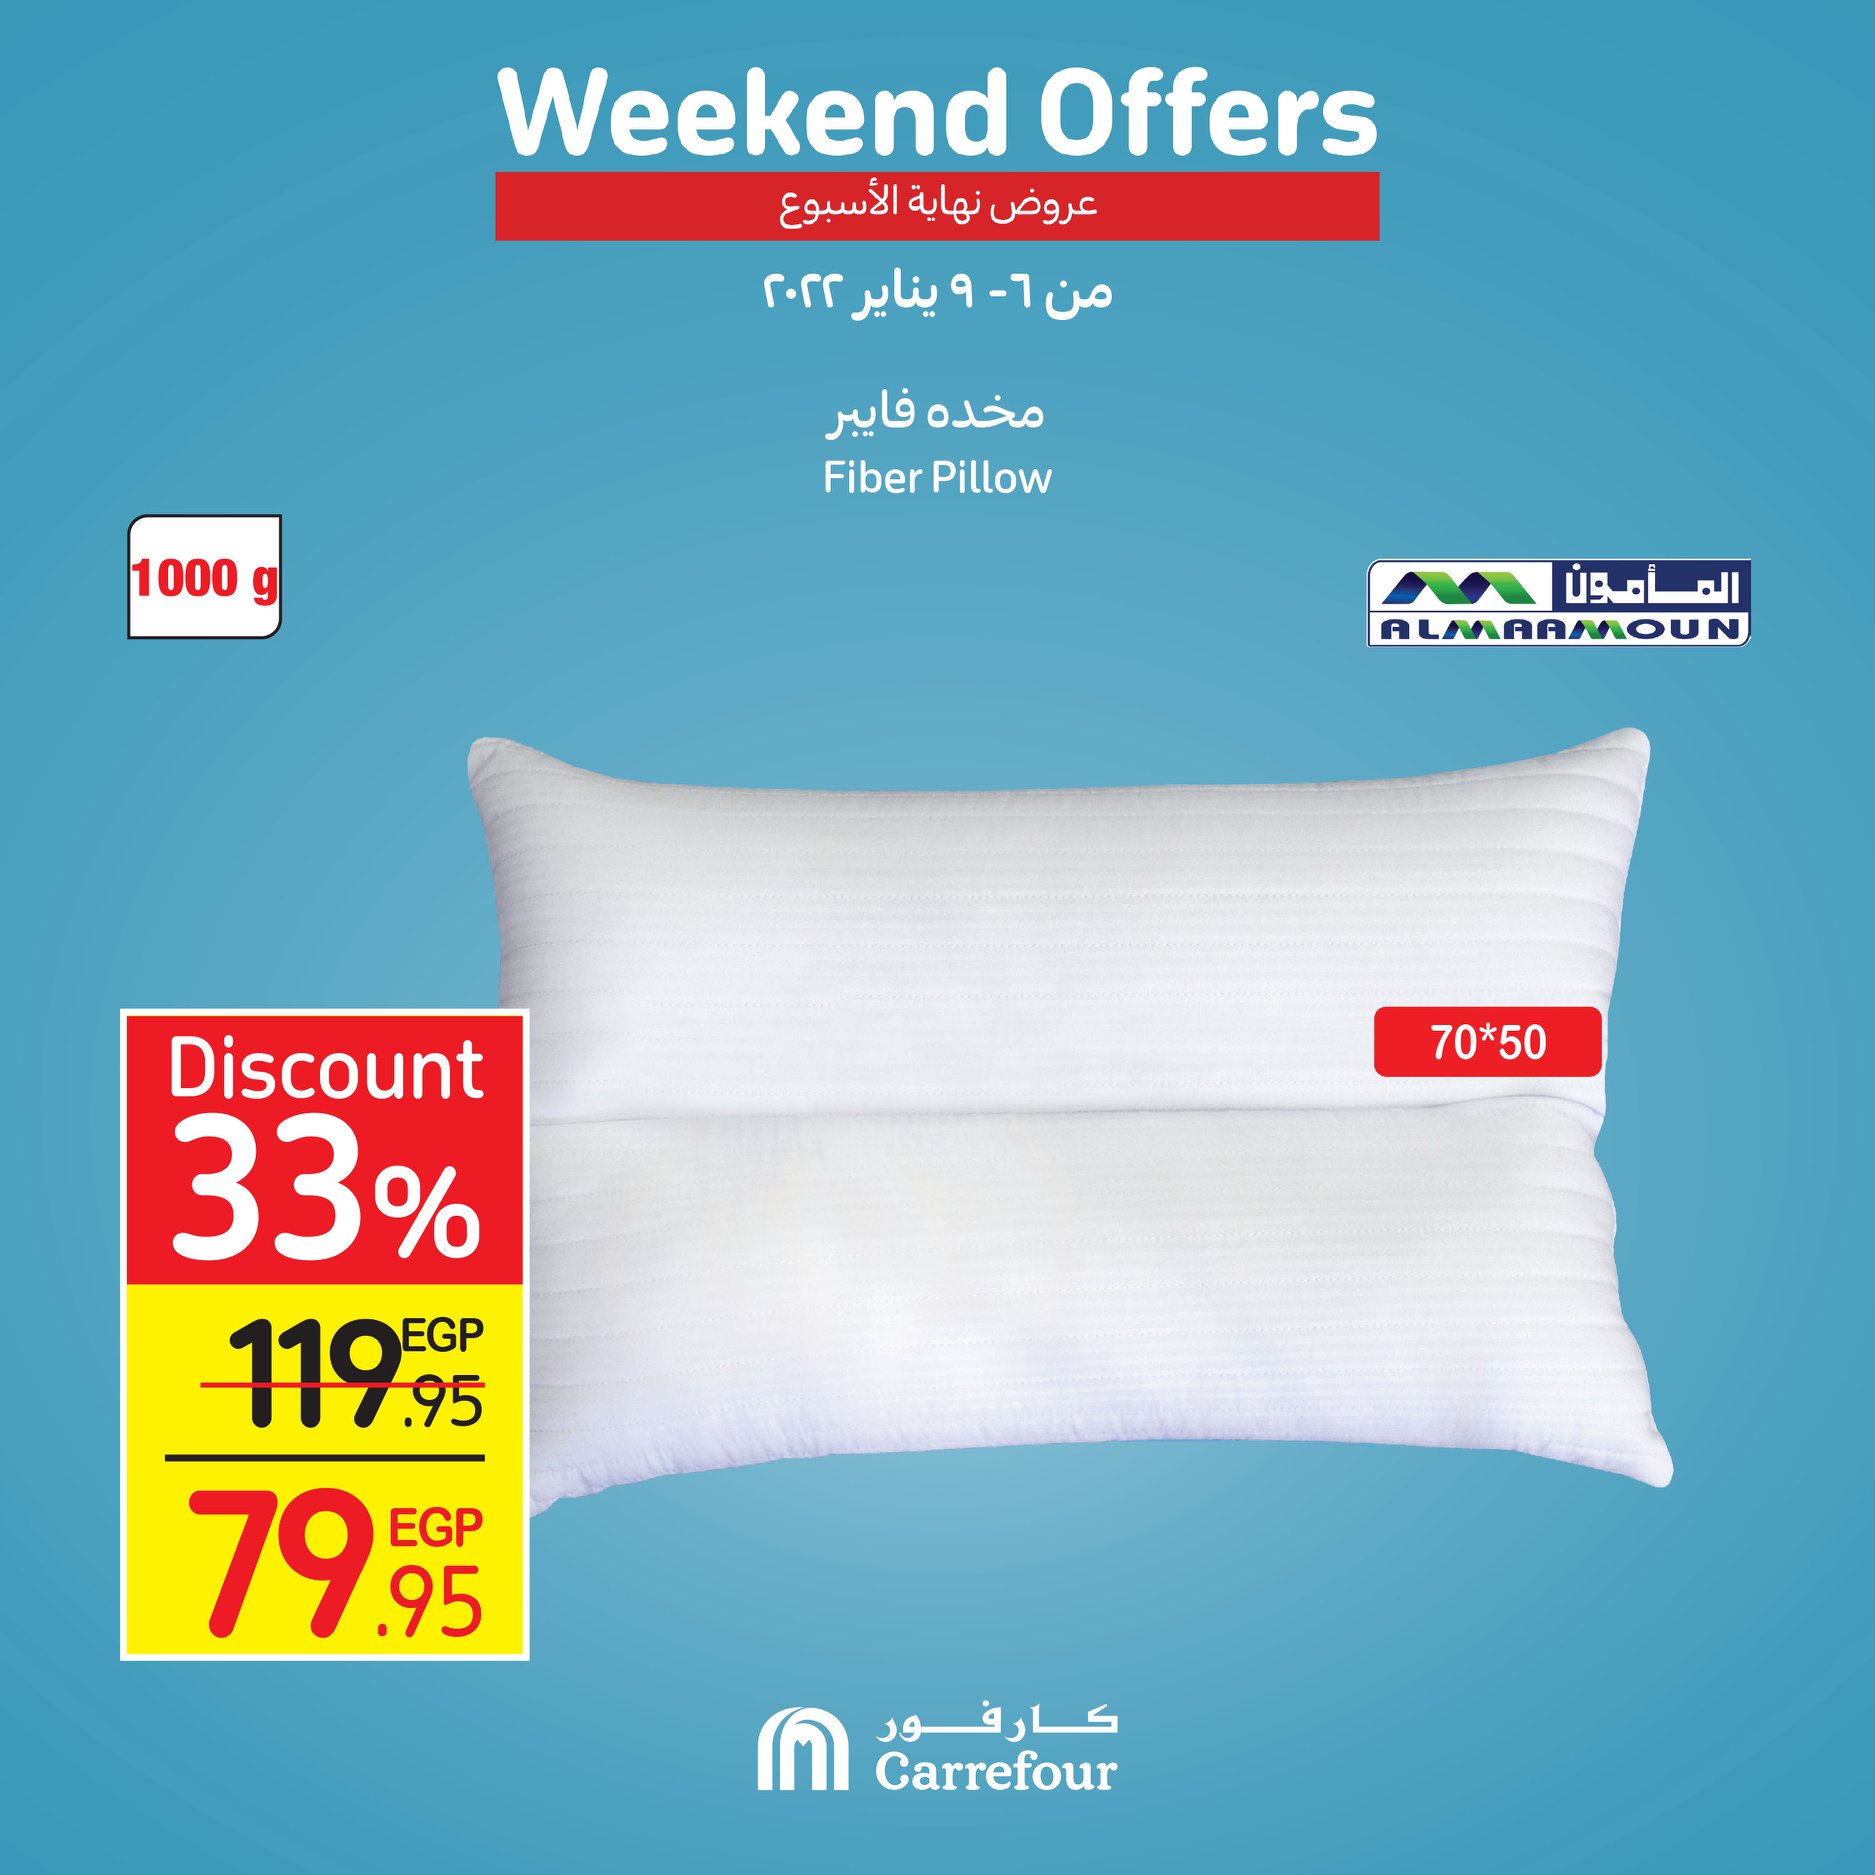 Now, the strongest Carrefour offers and surprises, half-price discounts, at Weekend until January 16th, 38